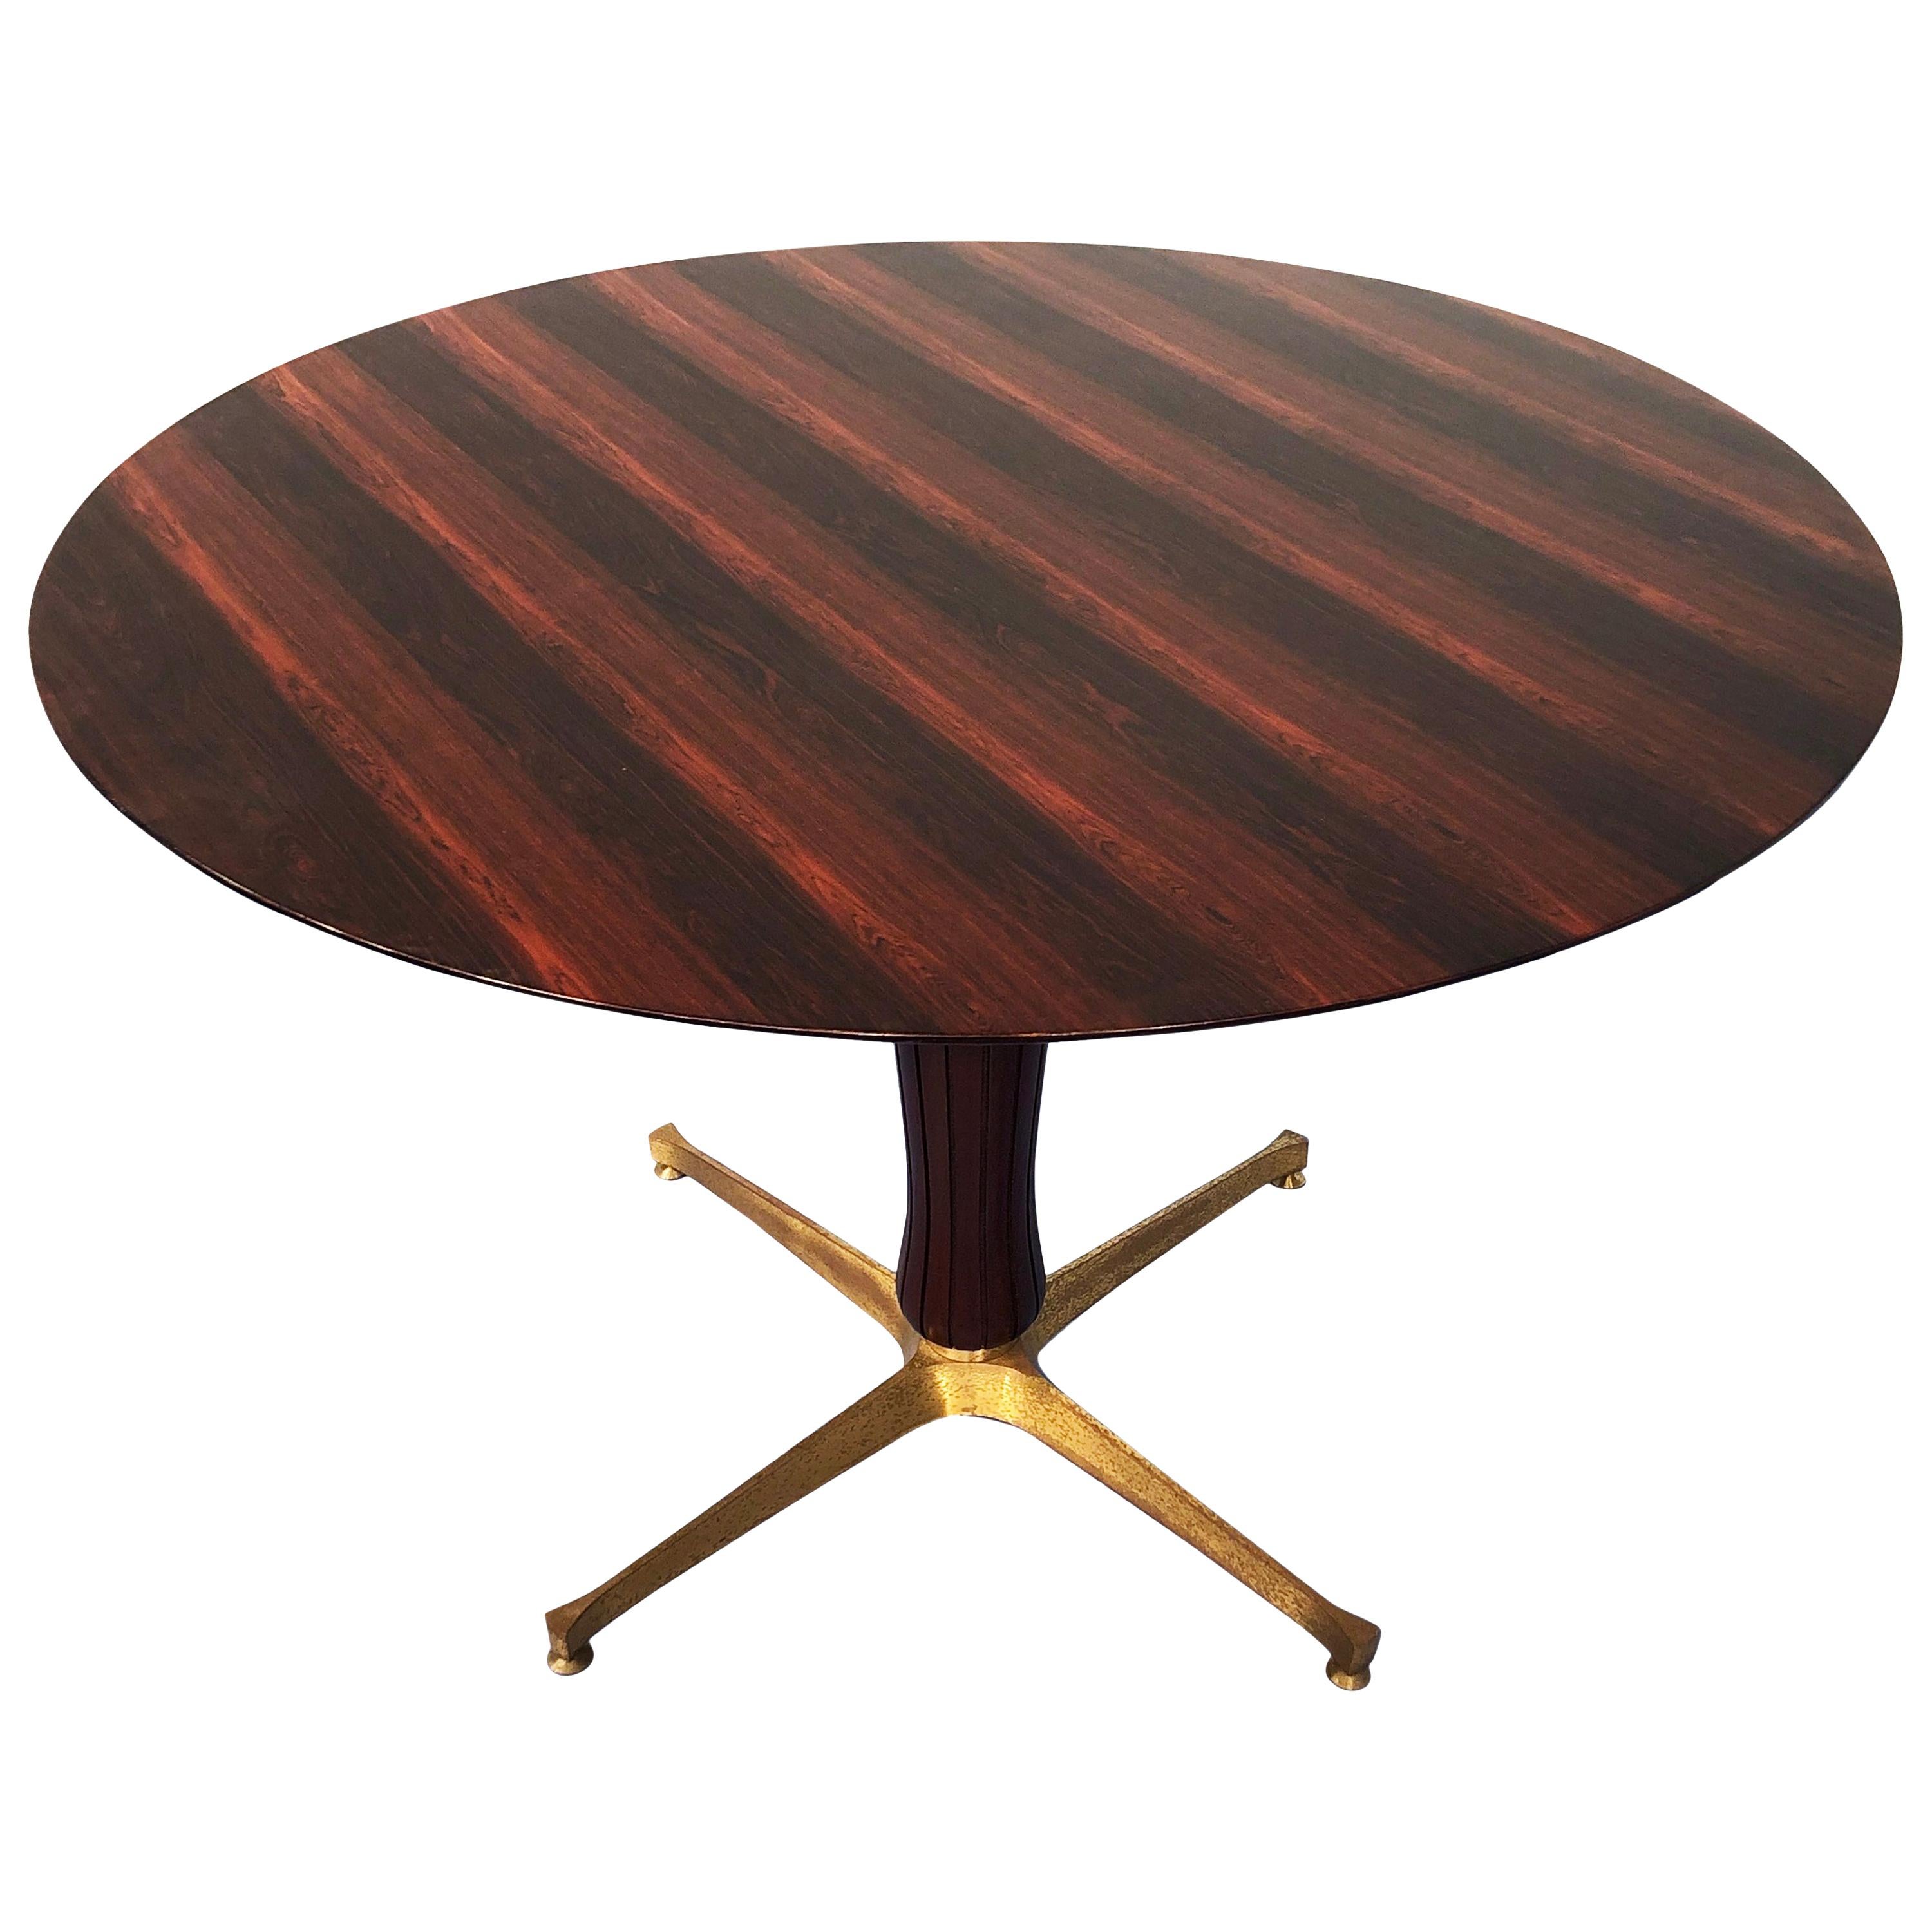 Italian Midcentury Teak Table Attributed to Paolo Buffa, 1950s For Sale